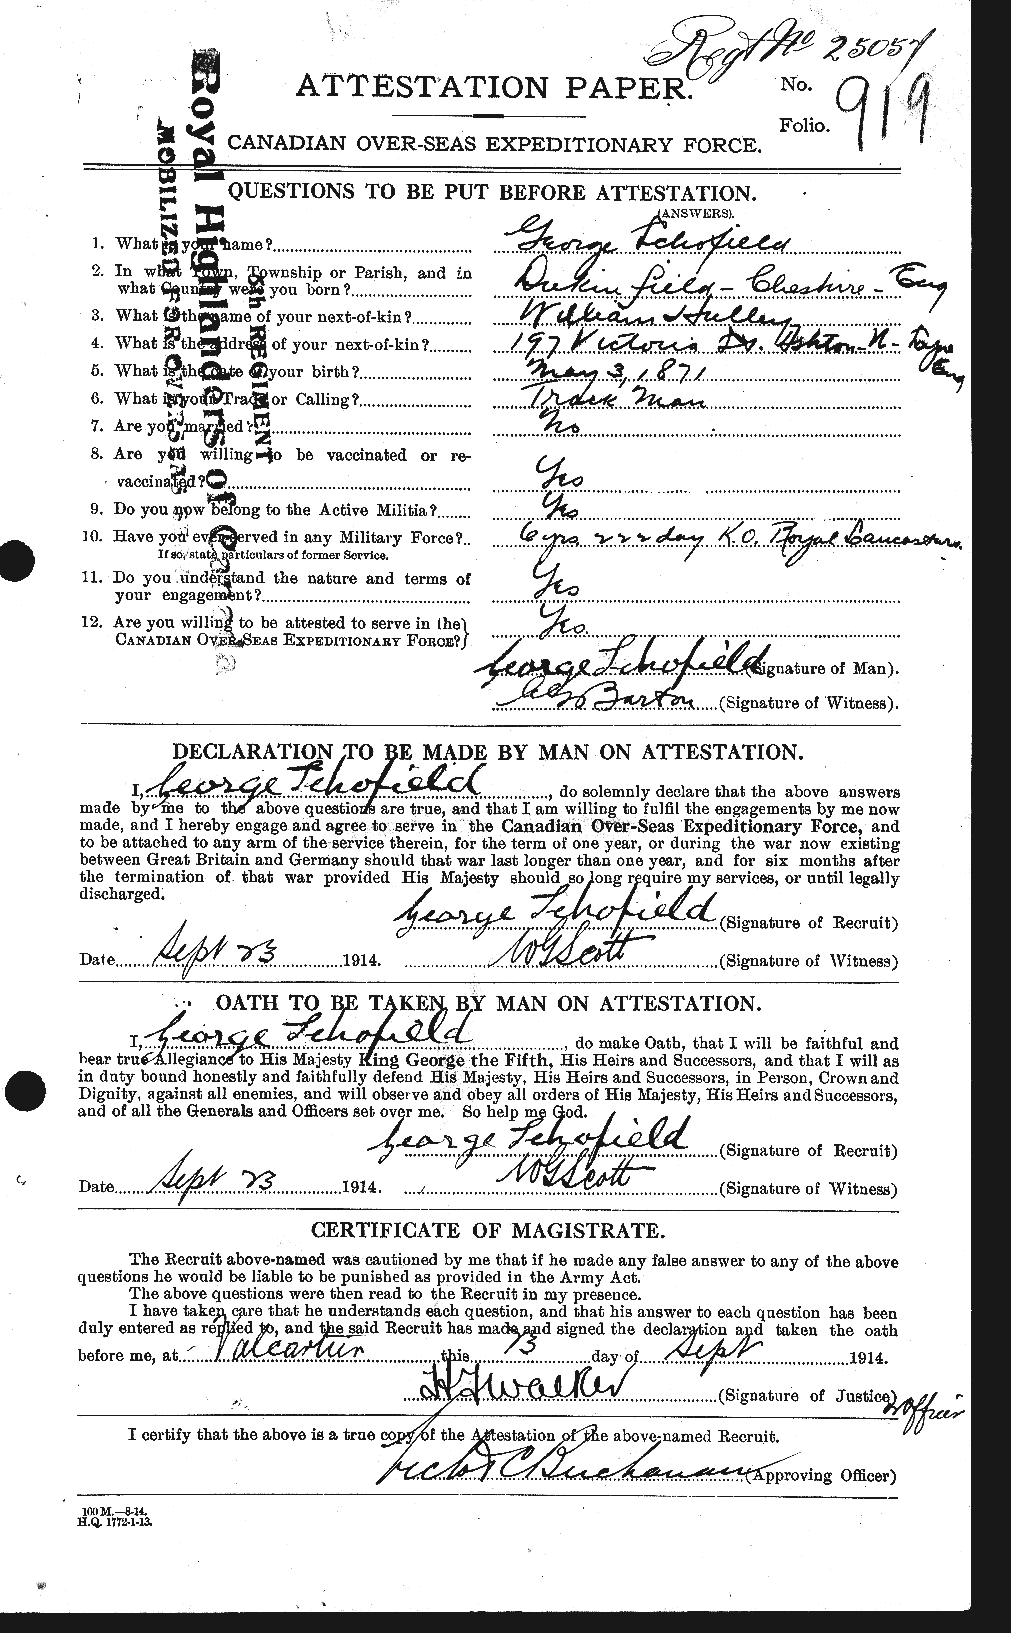 Personnel Records of the First World War - CEF 082195a